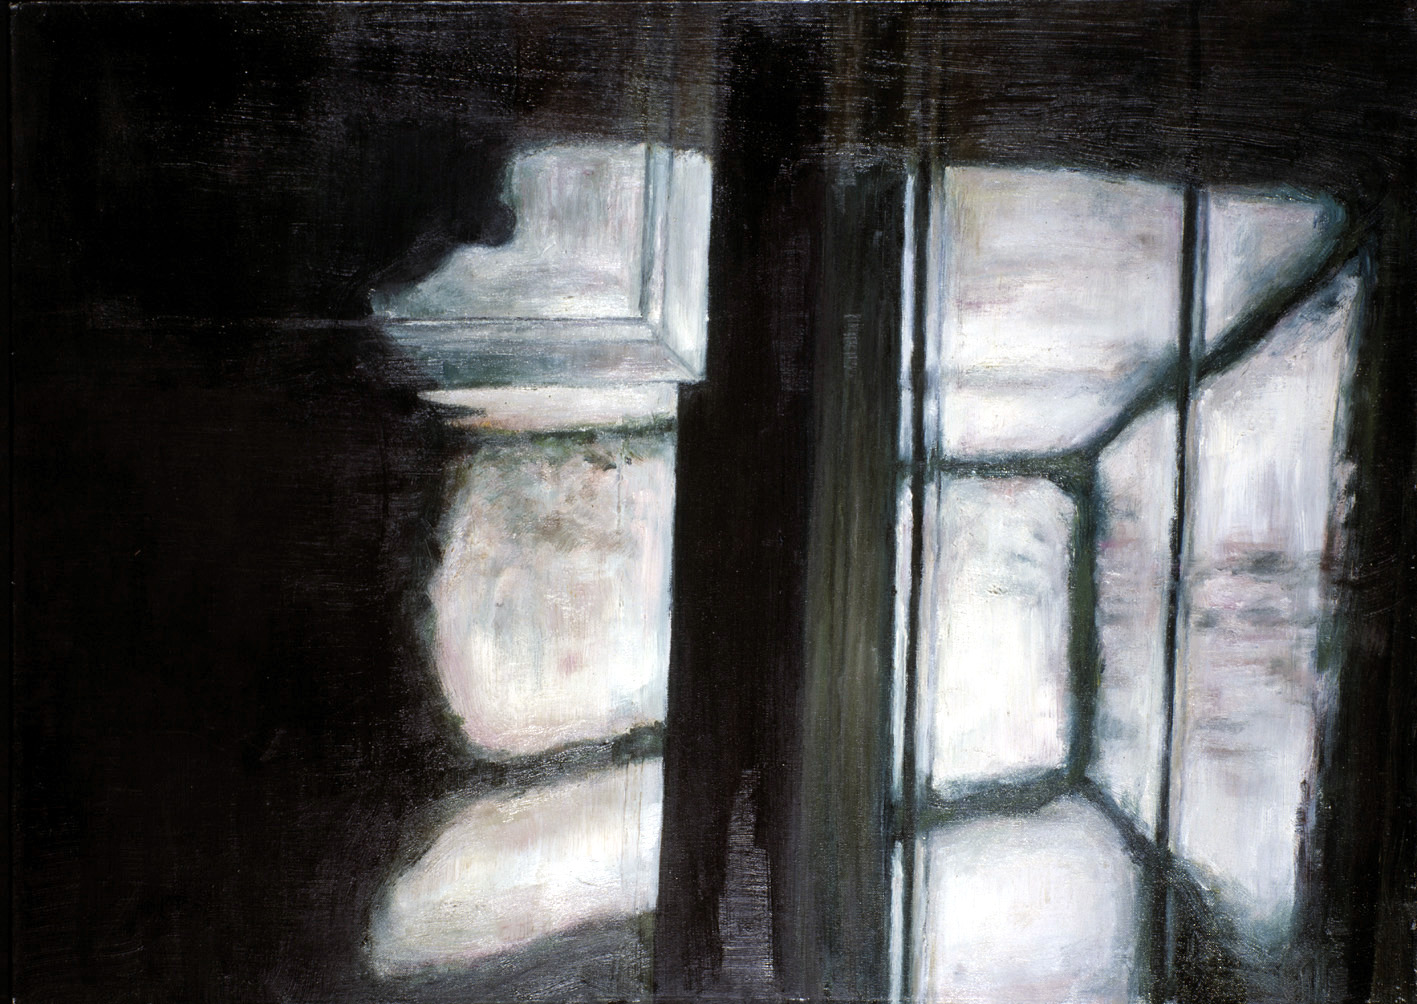   Interior with angles  Oil on panel  50 x 70 cm  2002 